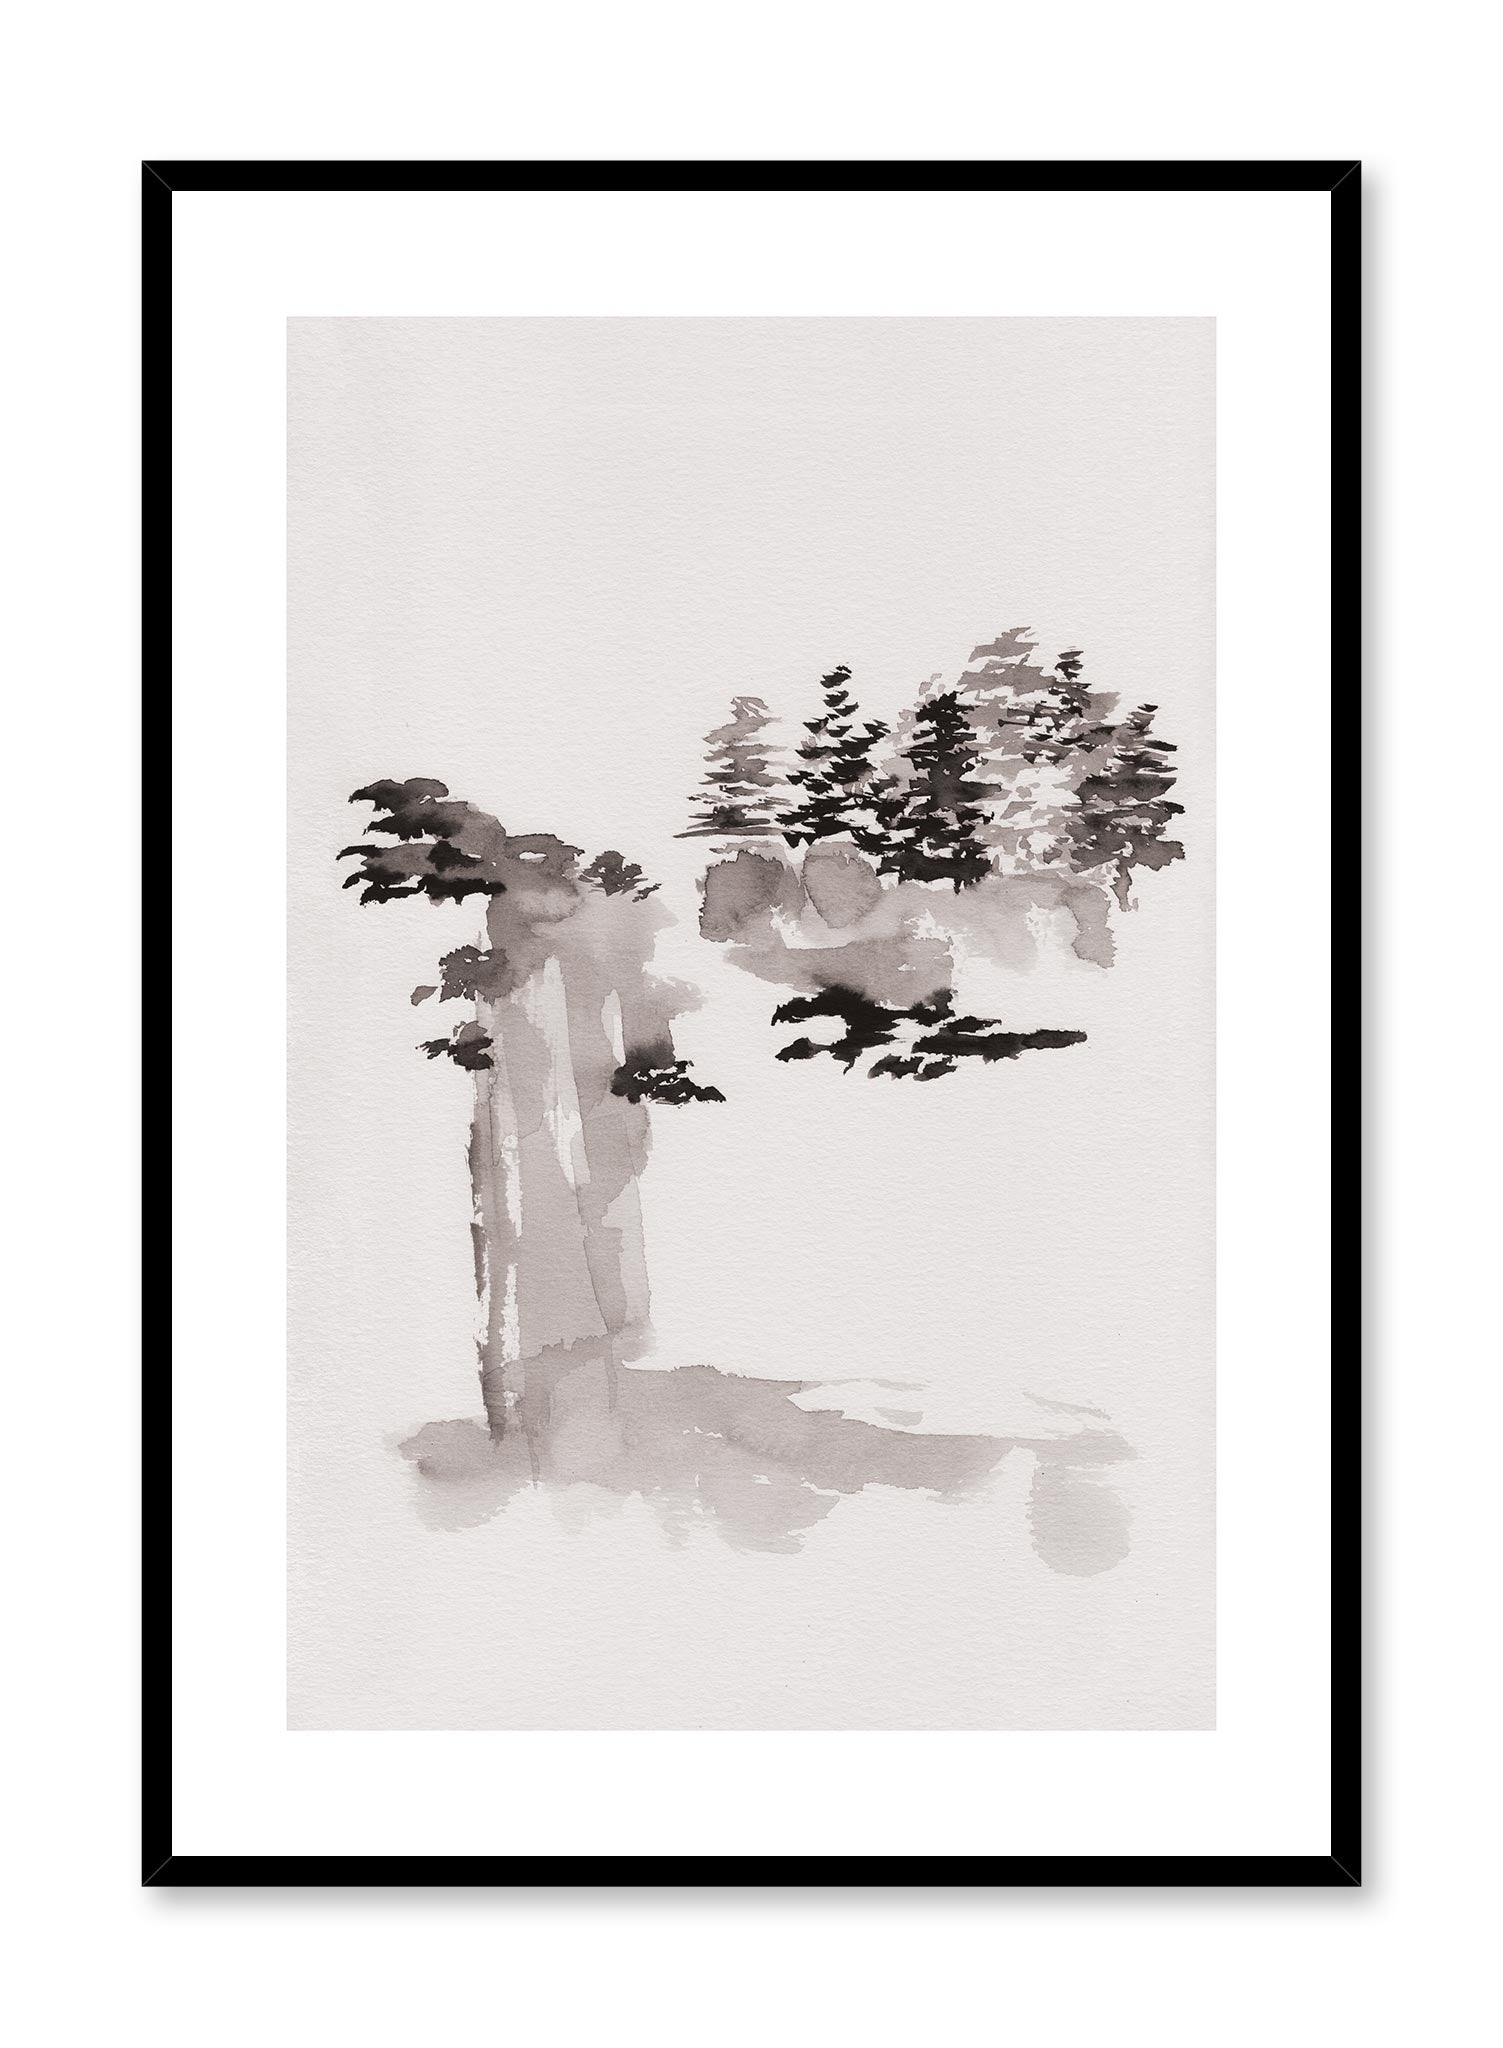 Ink Forest is a minimalist illustration by Opposite Wall of an abstract waterfall and forest scenery drawn in ink.